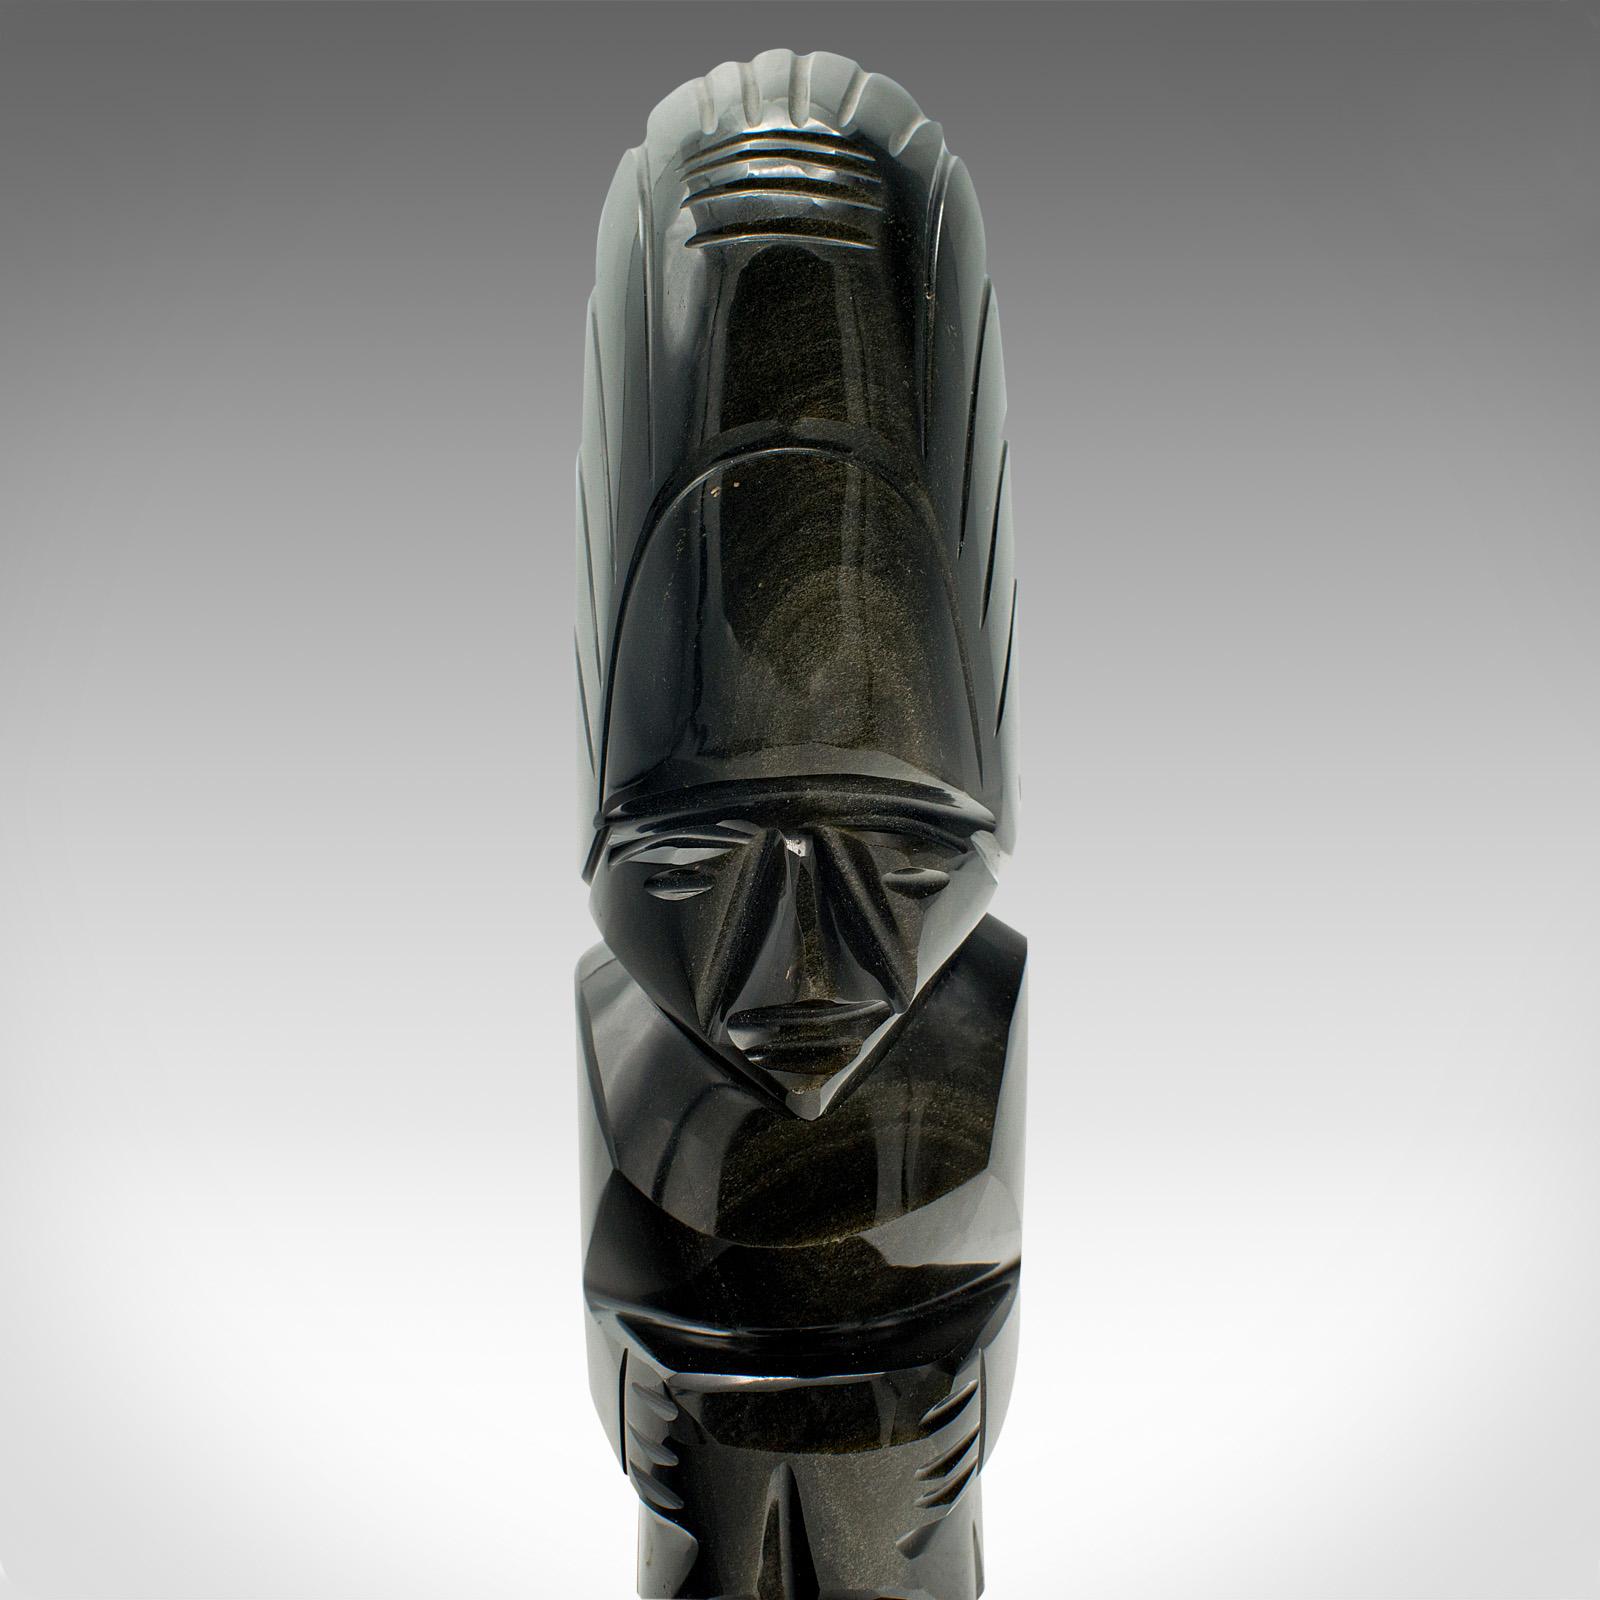 Stone Small Vintage Aztec Idol Figure, South American, Obsidian, Mayan Sculpture, 1950 For Sale